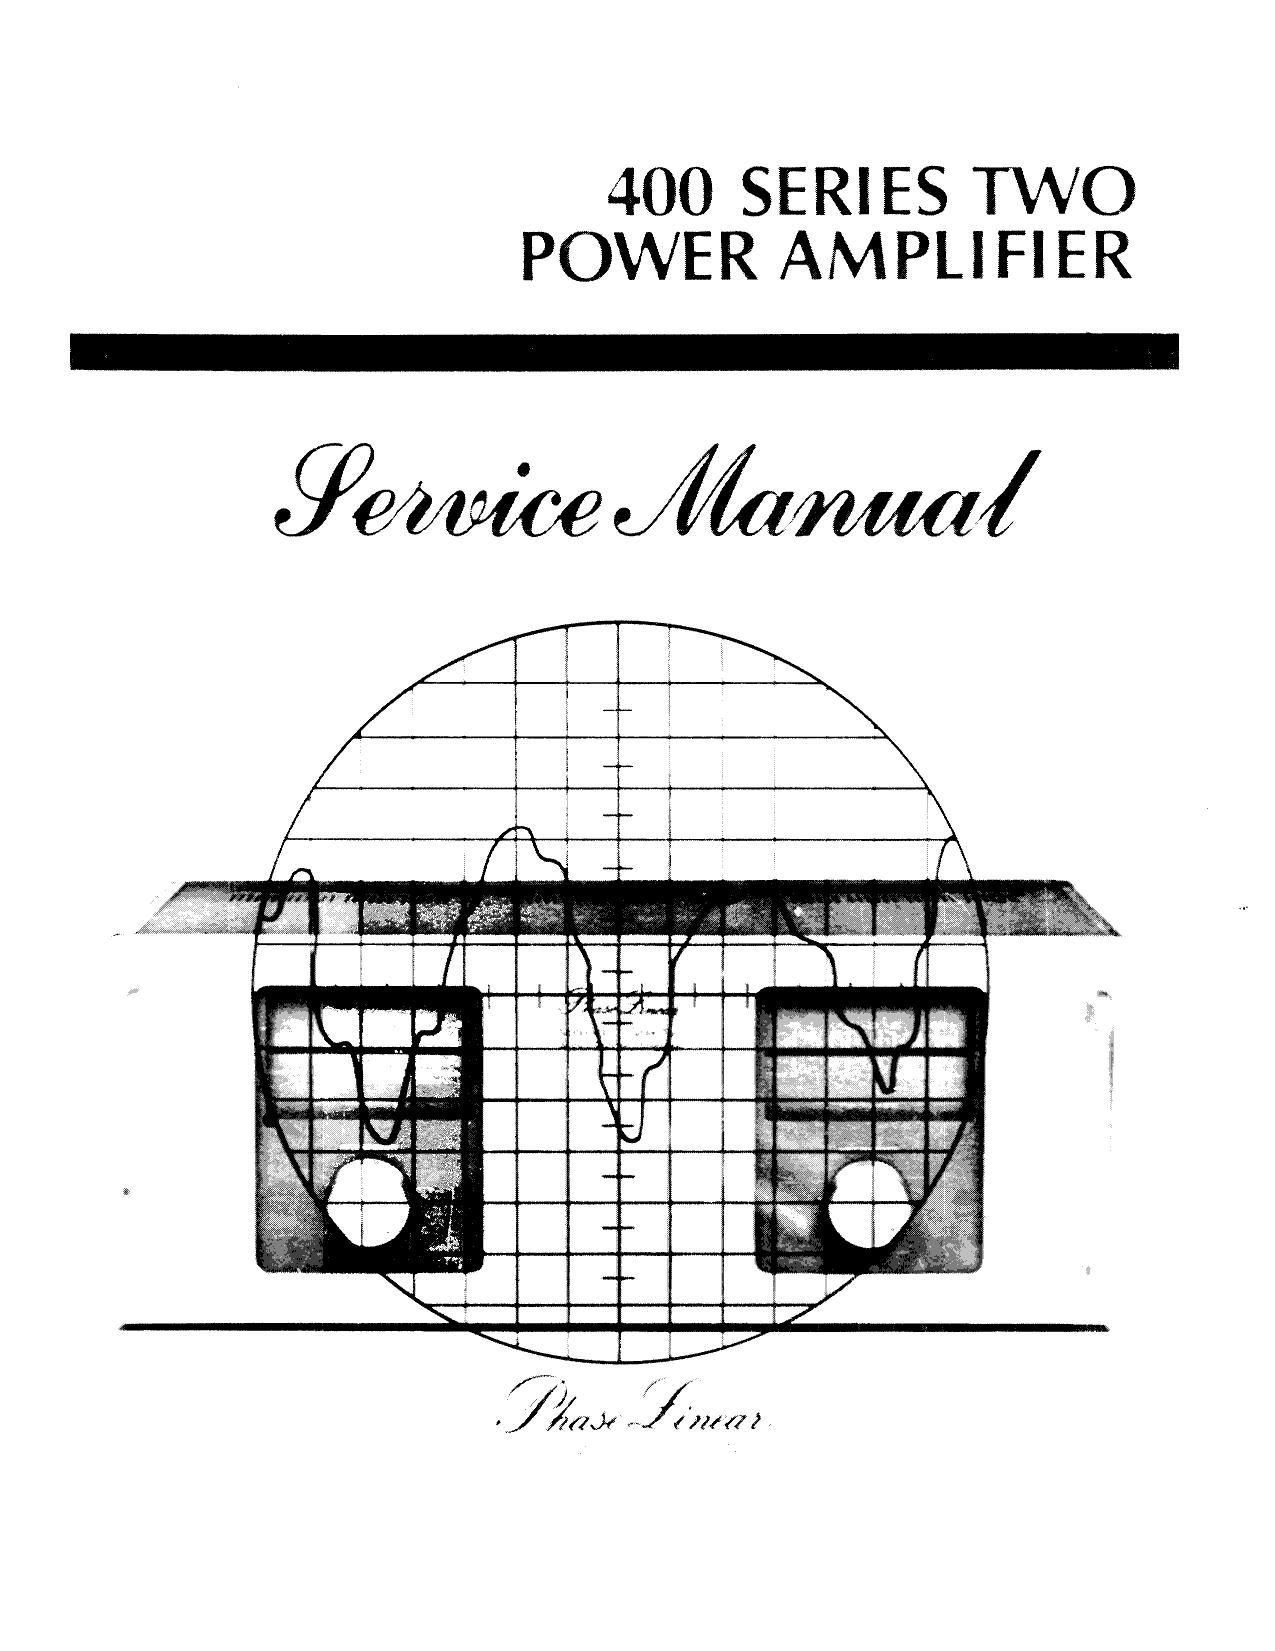 Phase Linear 400 S2 Service Manual